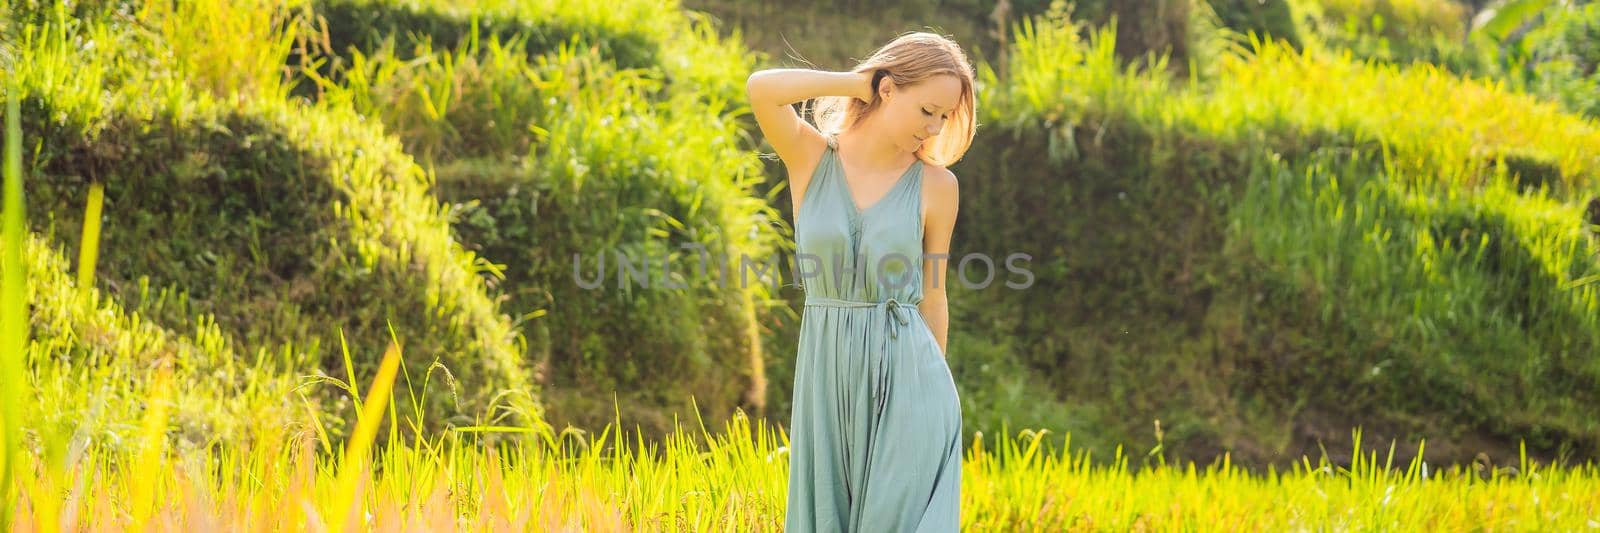 BANNER, LONG FORMAT Beautiful young woman walk at typical Asian hillside with rice farming, mountain shape green cascade rice field terraces paddies. Ubud, Bali, Indonesia. Bali travel concept.